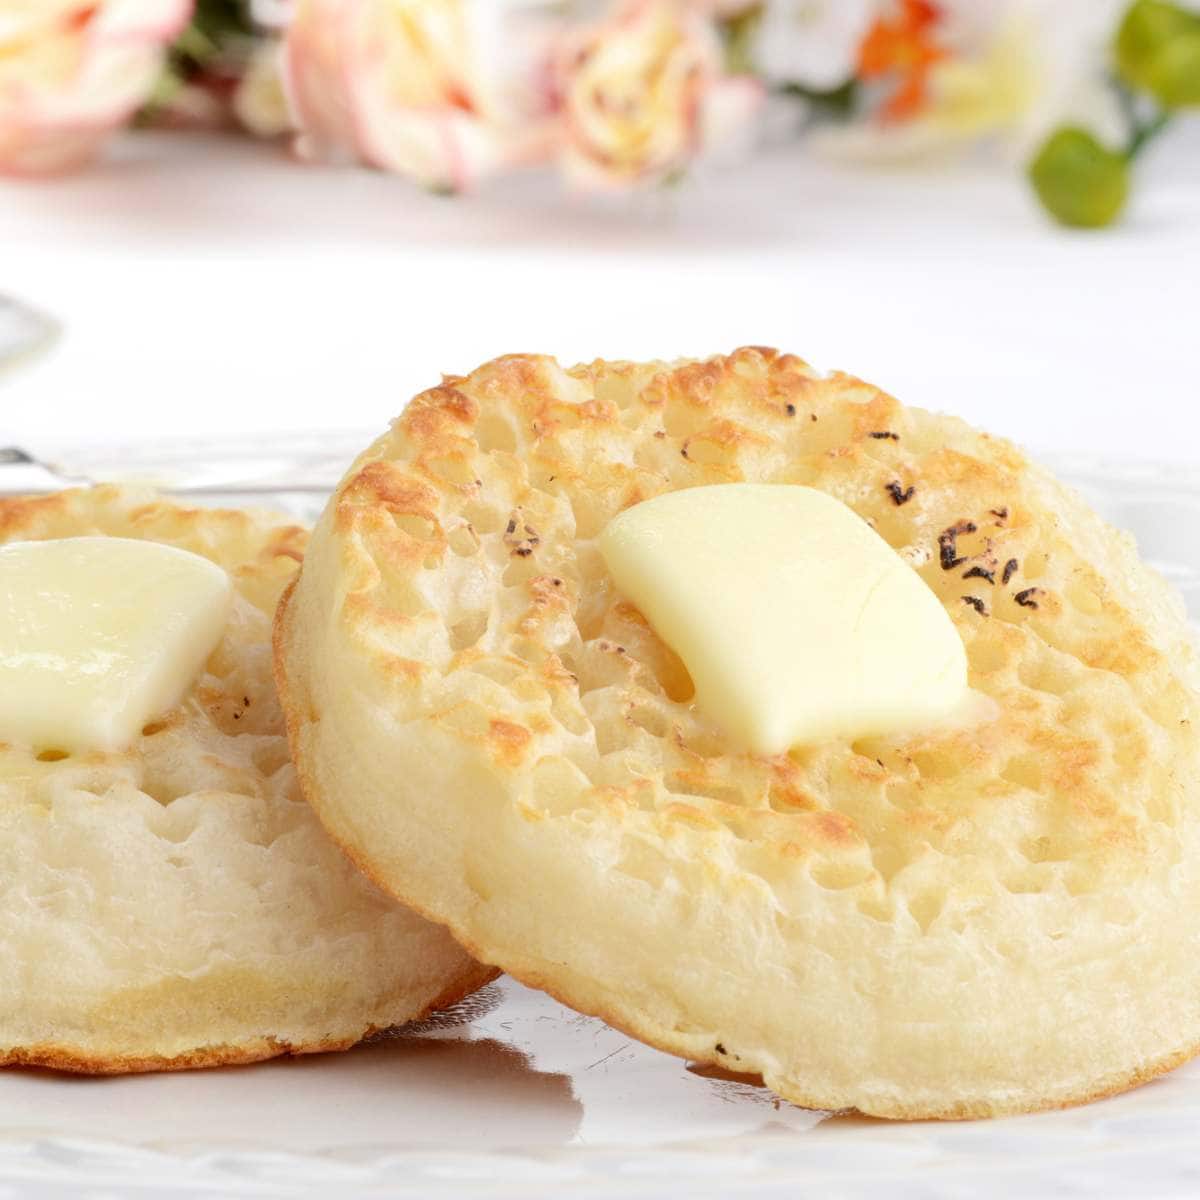 Crumpets topped with pats of butter.